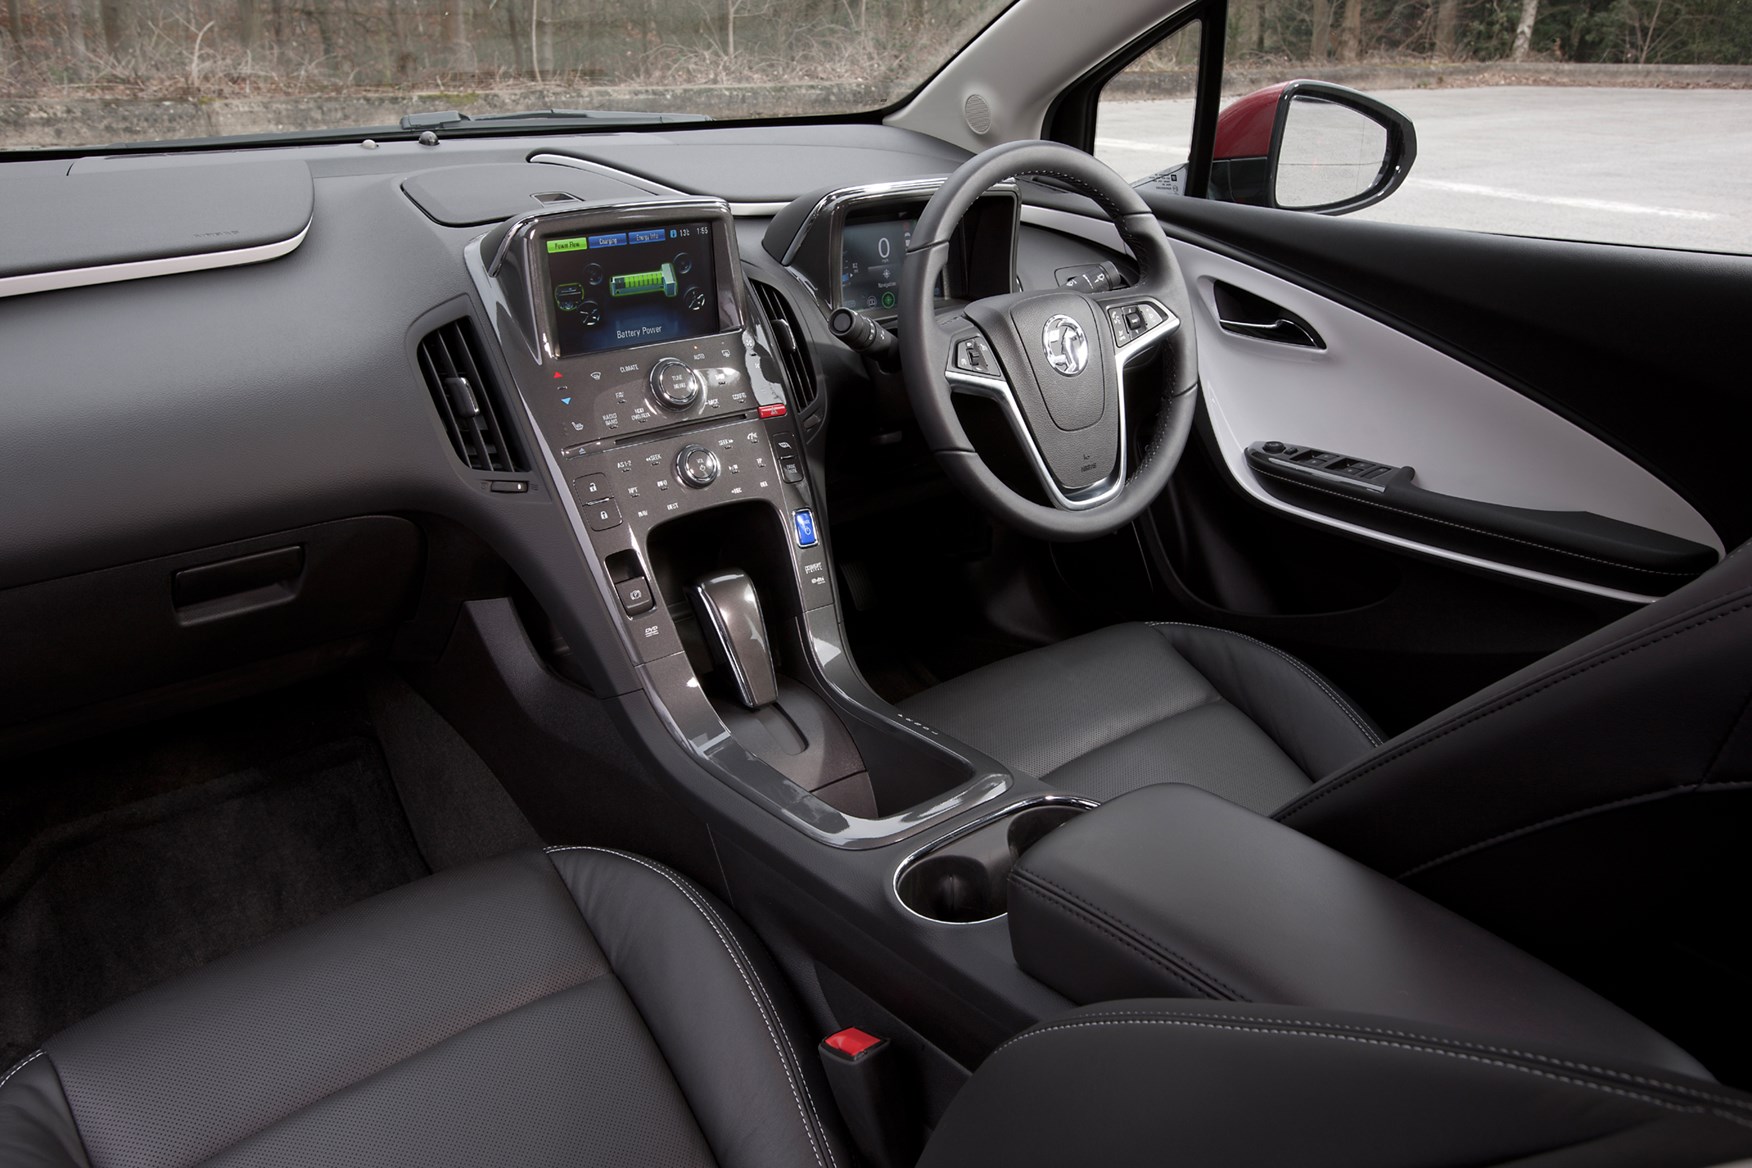 Playwright egg Pride Used Vauxhall Ampera Hatchback (2012 - 2015) interior, tech and comfort |  Parkers